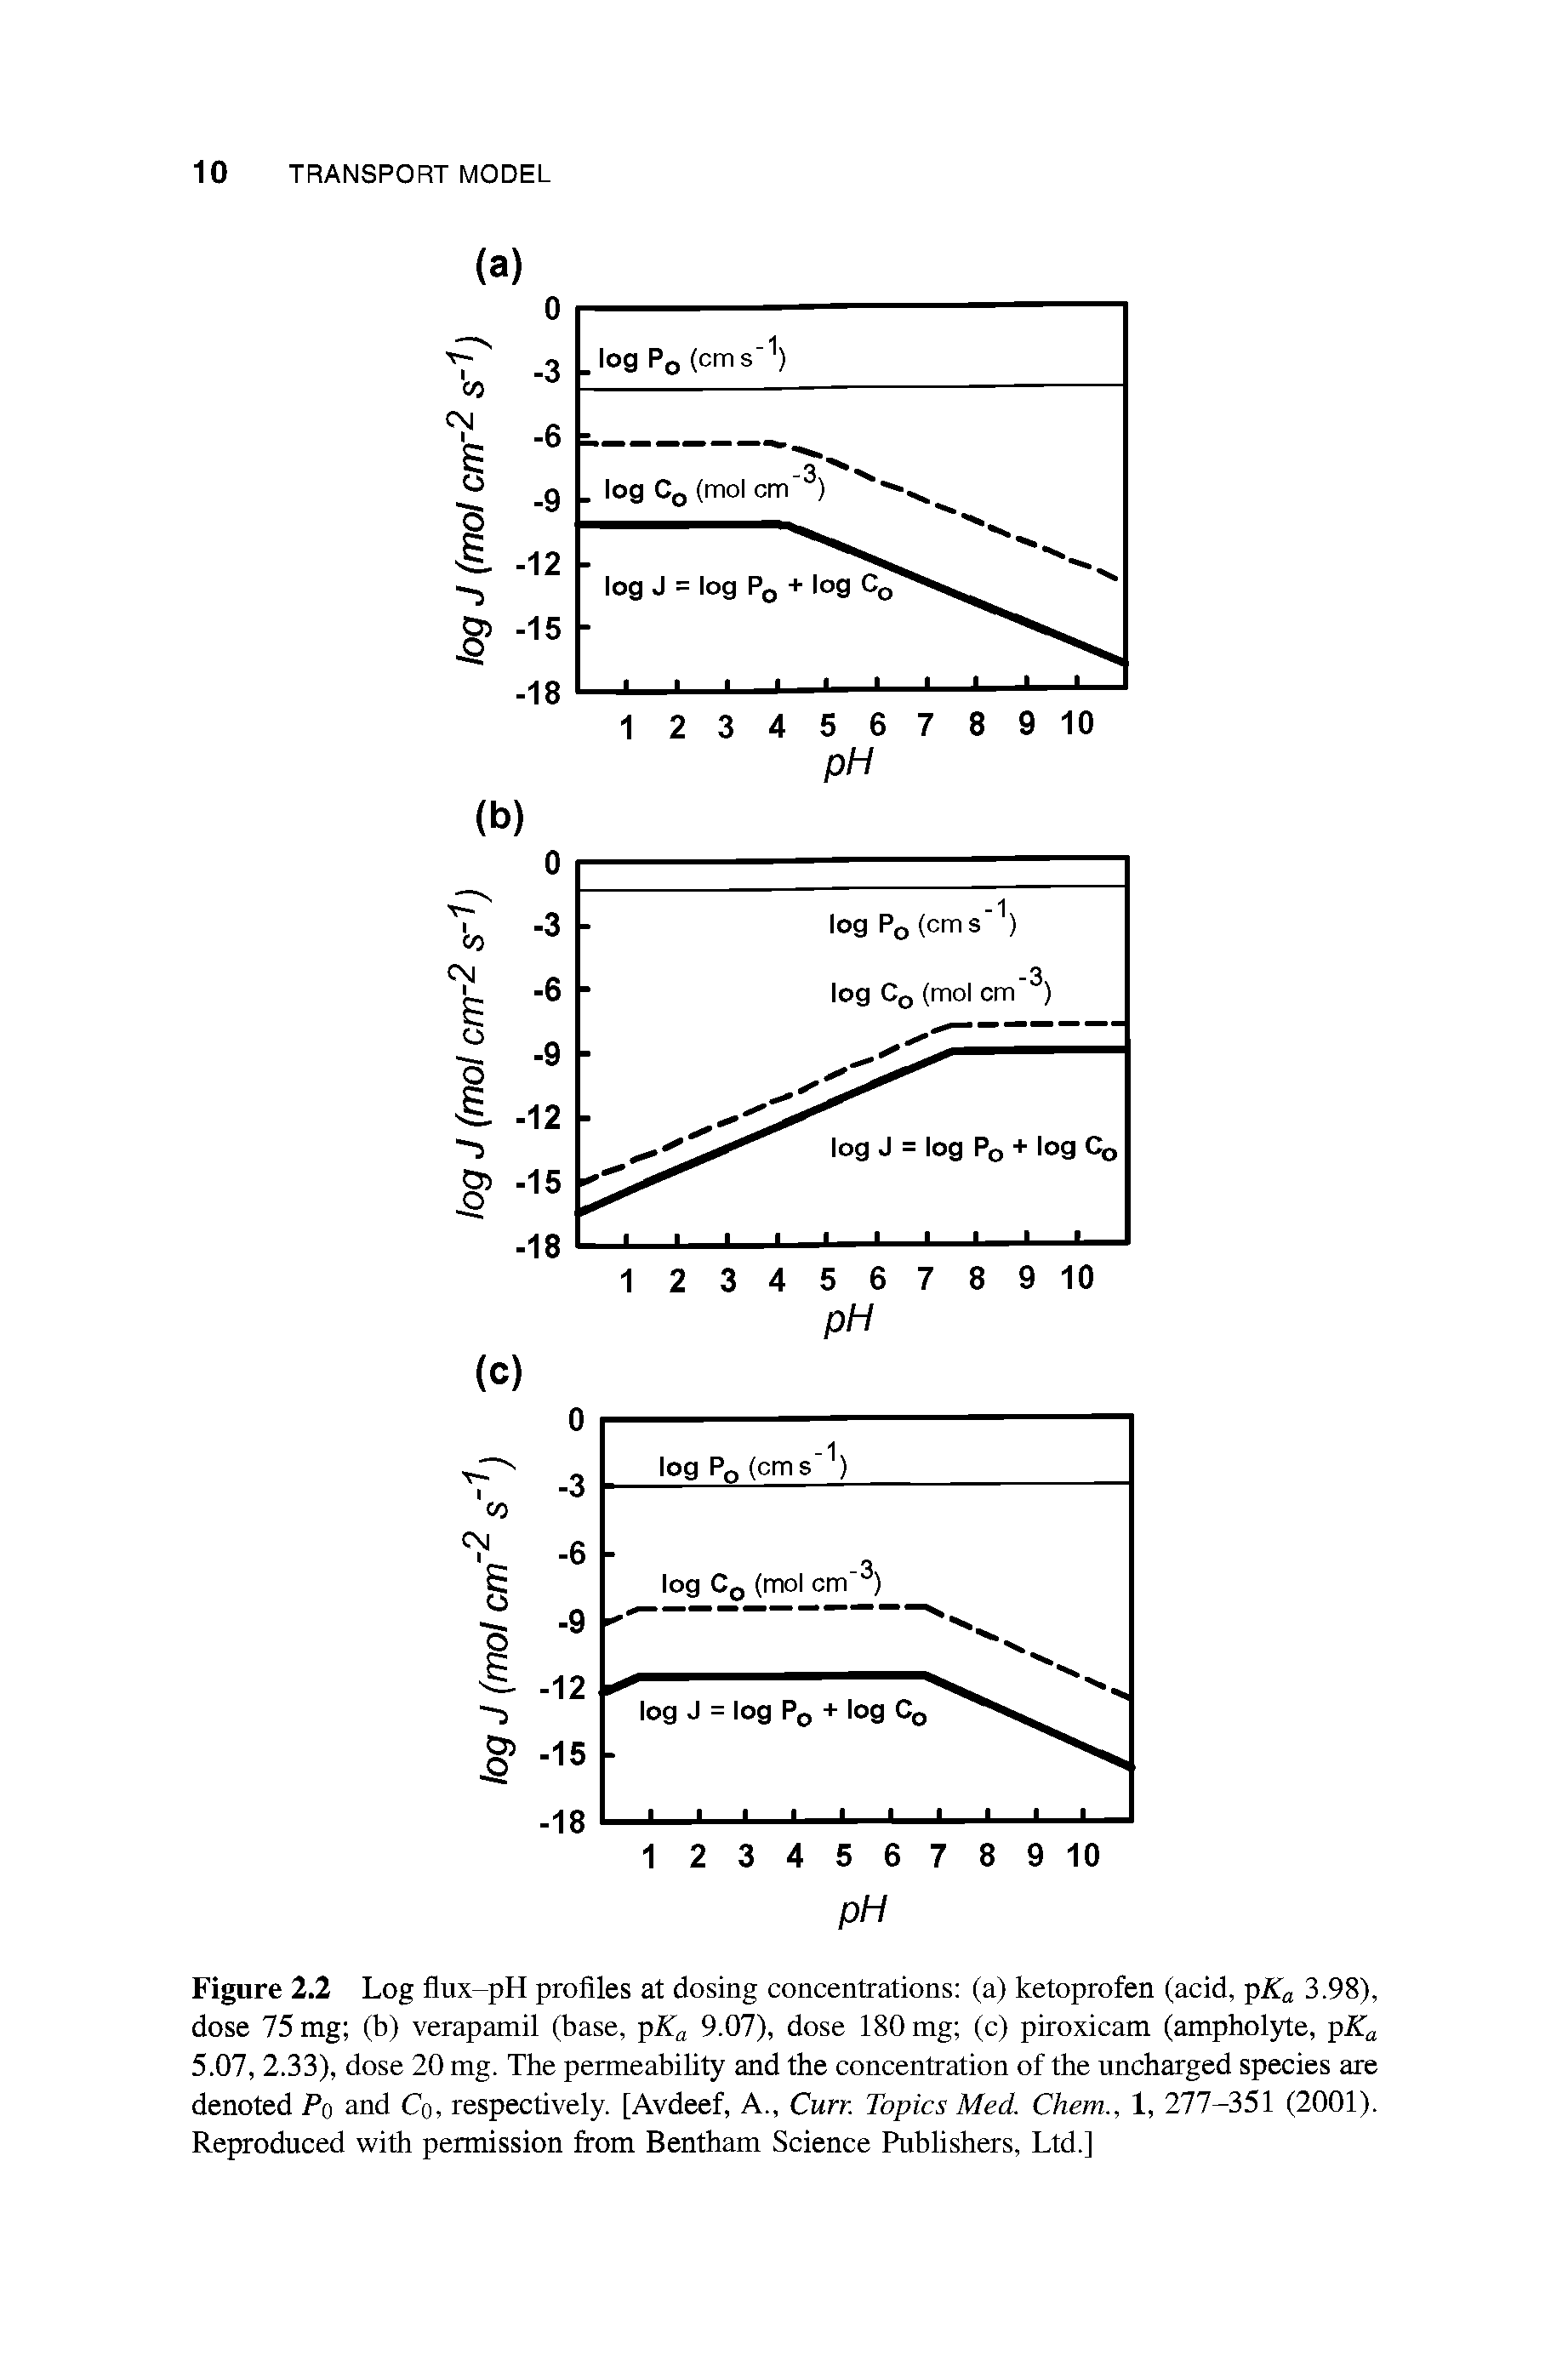 Figure 2.2 Log flux-pH profiles at dosing concentrations (a) ketoprofen (acid, pKa 3.98), dose 75 mg (b) verapamil (base, pKa 9.07), dose 180 mg (c) piroxicam (ampholyte, pKa 5.07, 2.33), dose 20 mg. The permeability and the concentration of the uncharged species are denoted Po and Co, respectively. [Avdeef, A., Curr. Topics Med. Chem., 1, 277-351 (2001). Reproduced with permission from Bentham Science Publishers, Ltd.]...